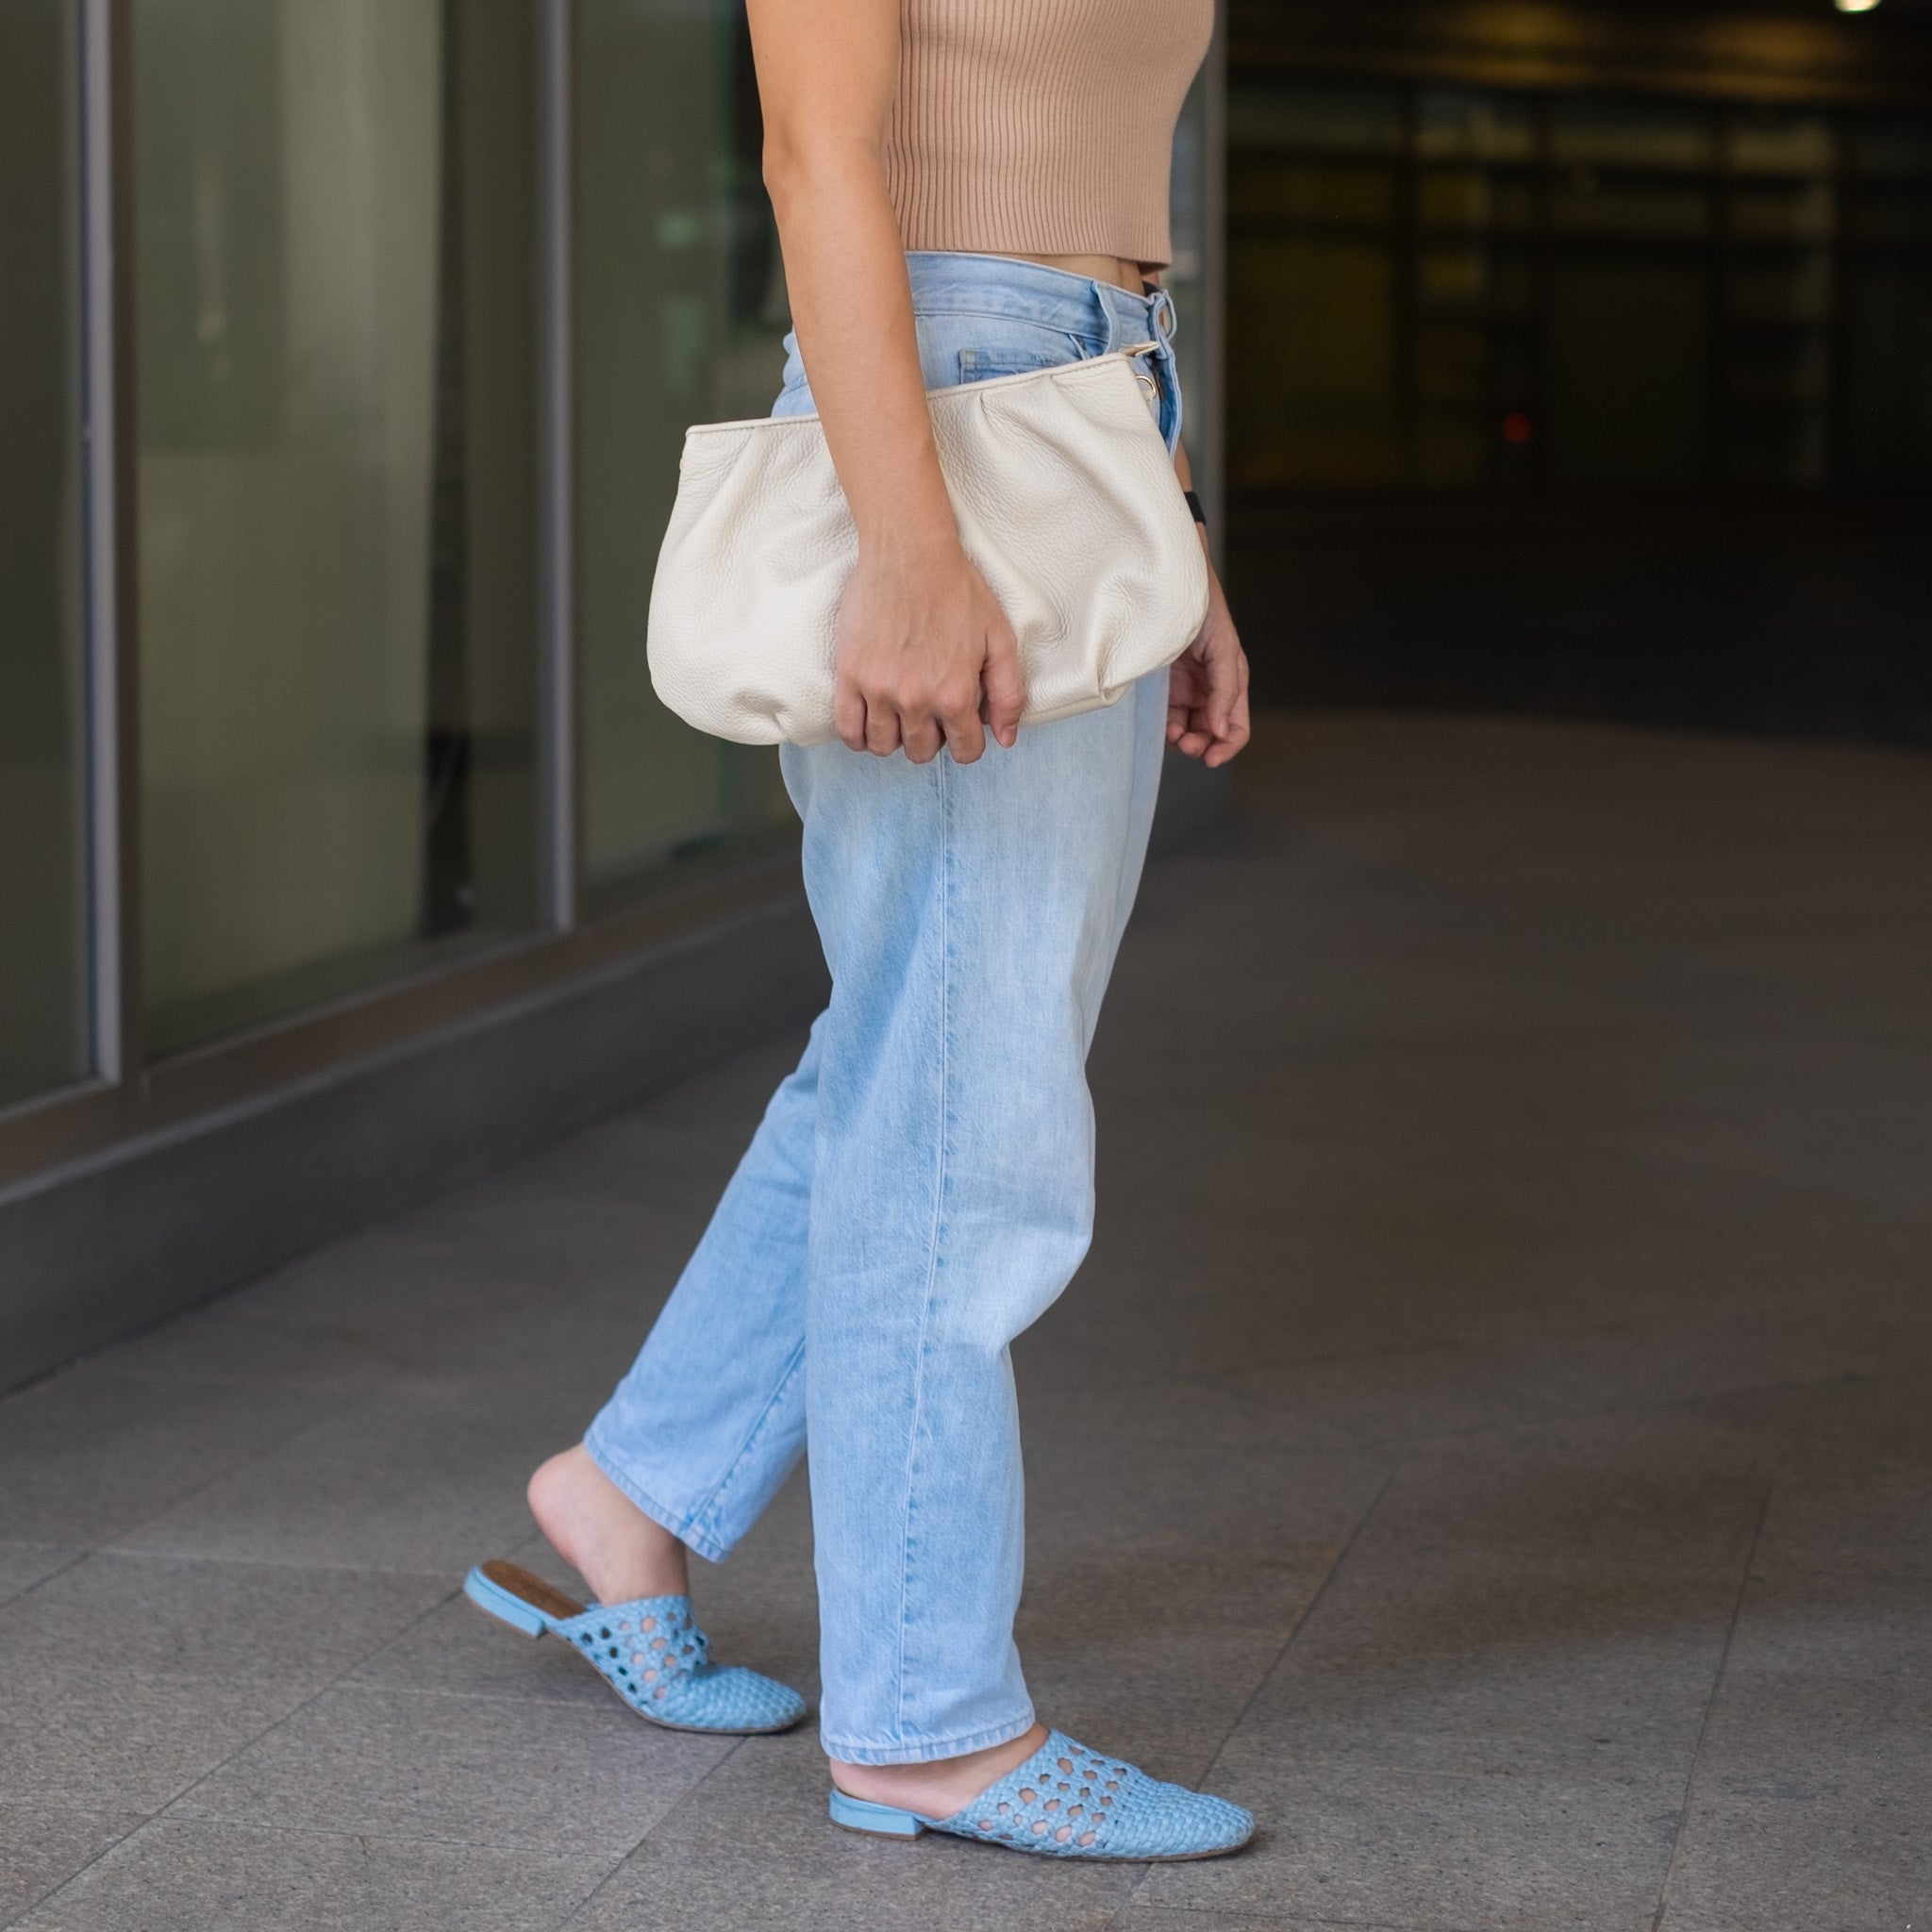 woman carrying an off-white clutch bag